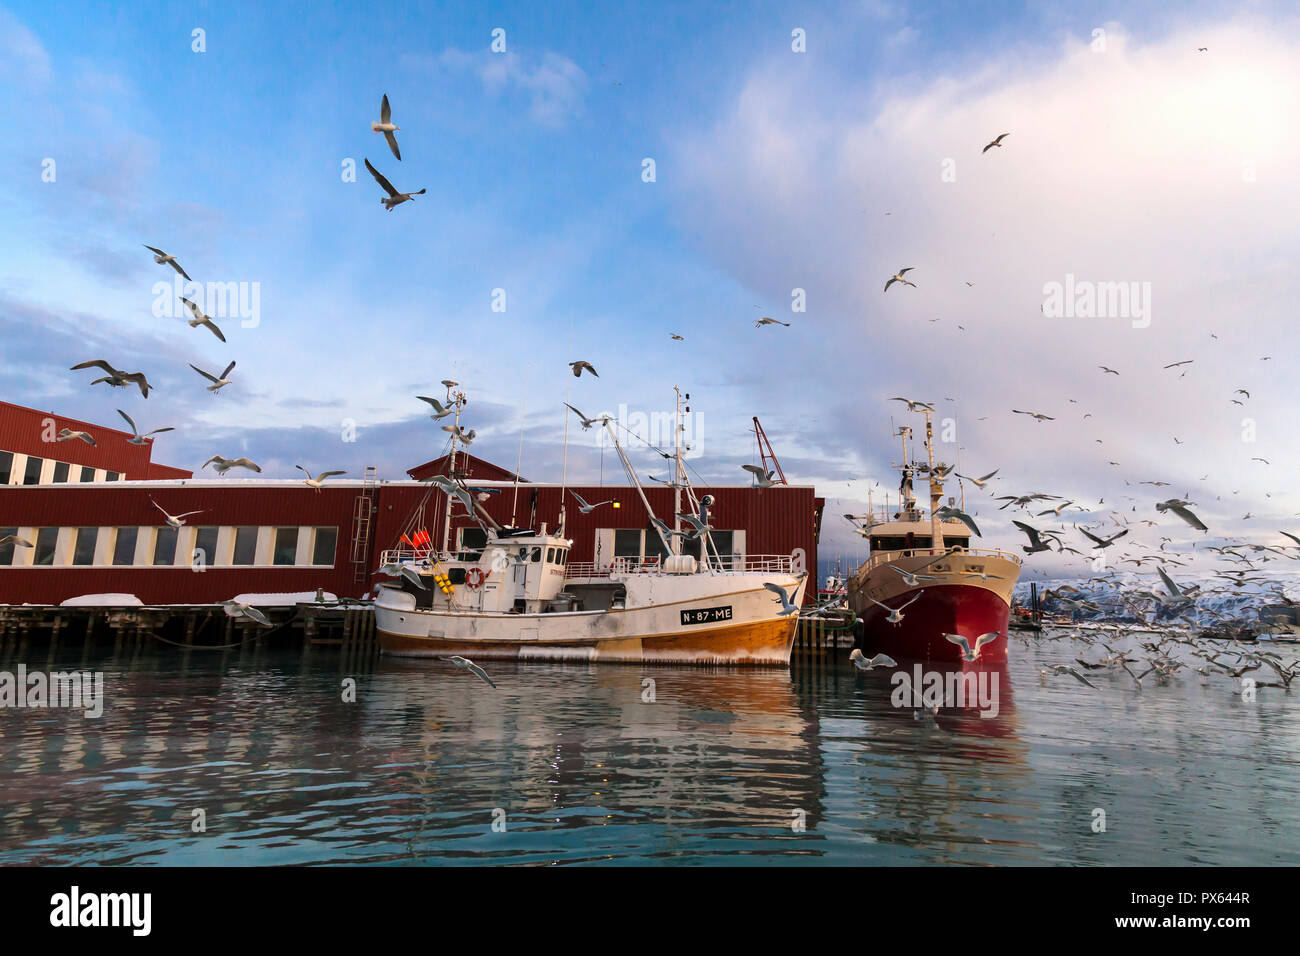 From the small fishing village of Baatsfjord, Finnmark county, north Norway. Stock Photo